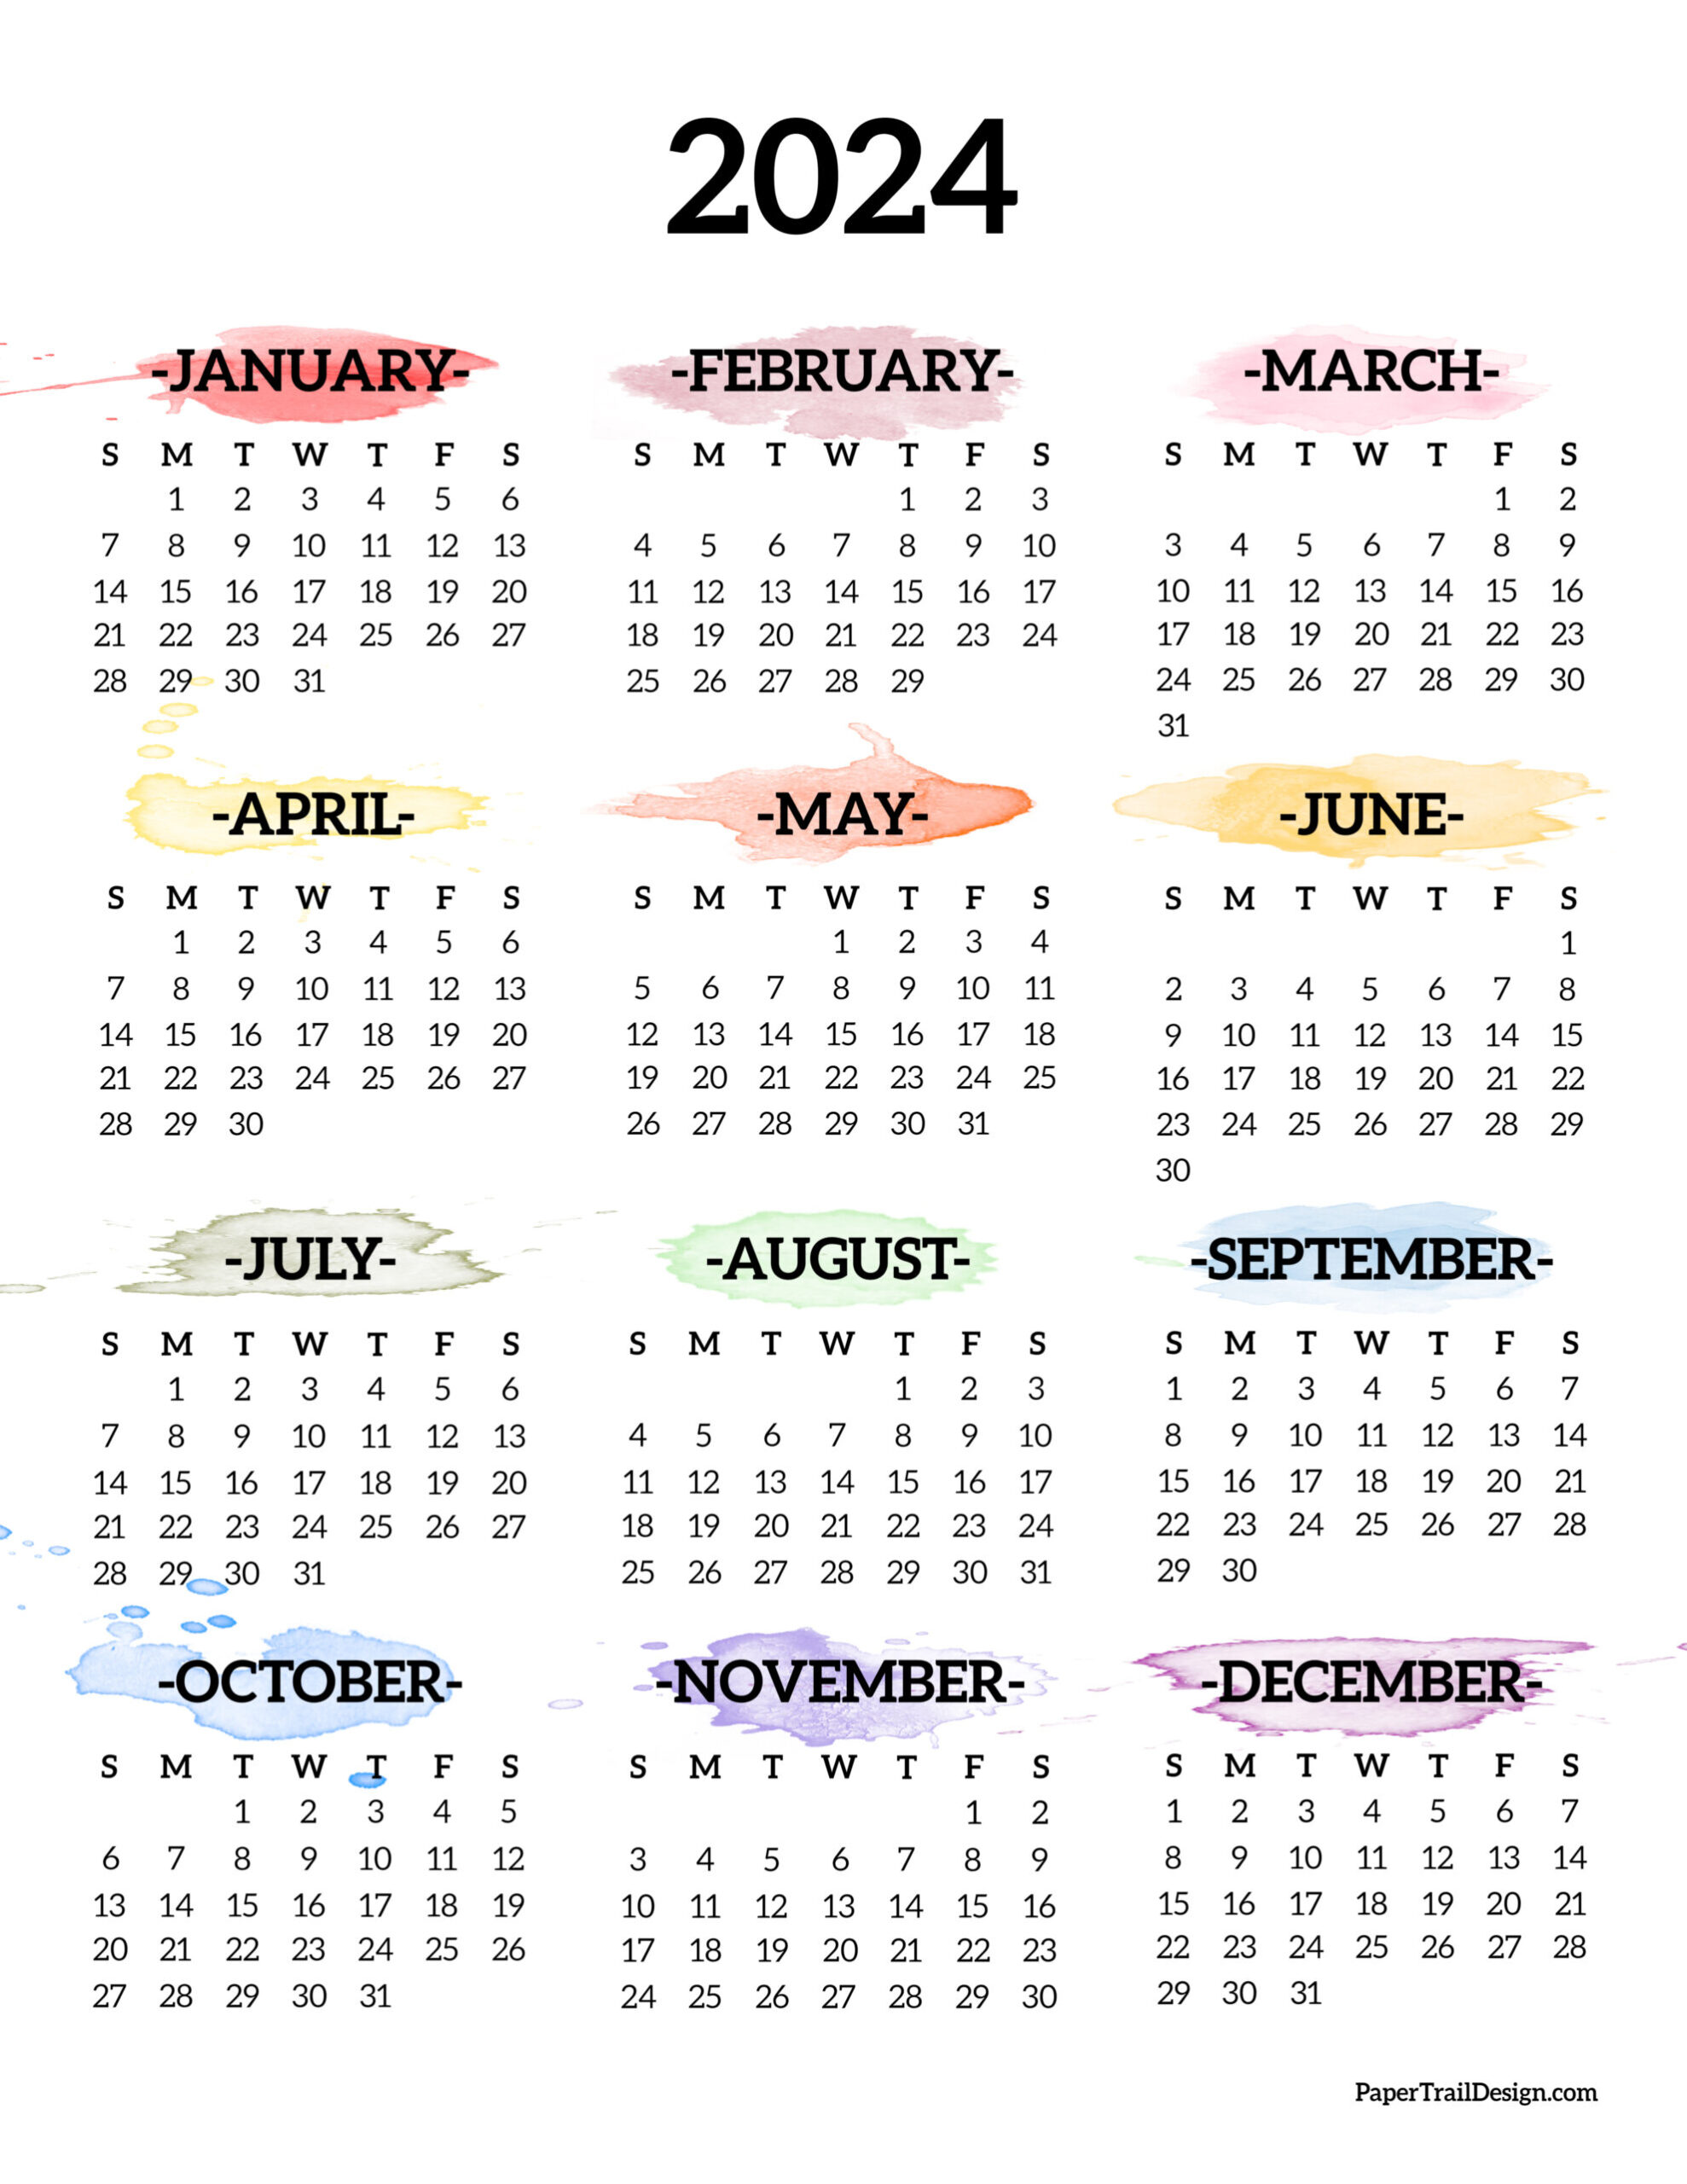 Calendar 2024 Printable One Page - Paper Trail Design for One Page 2024 Calendar Printable